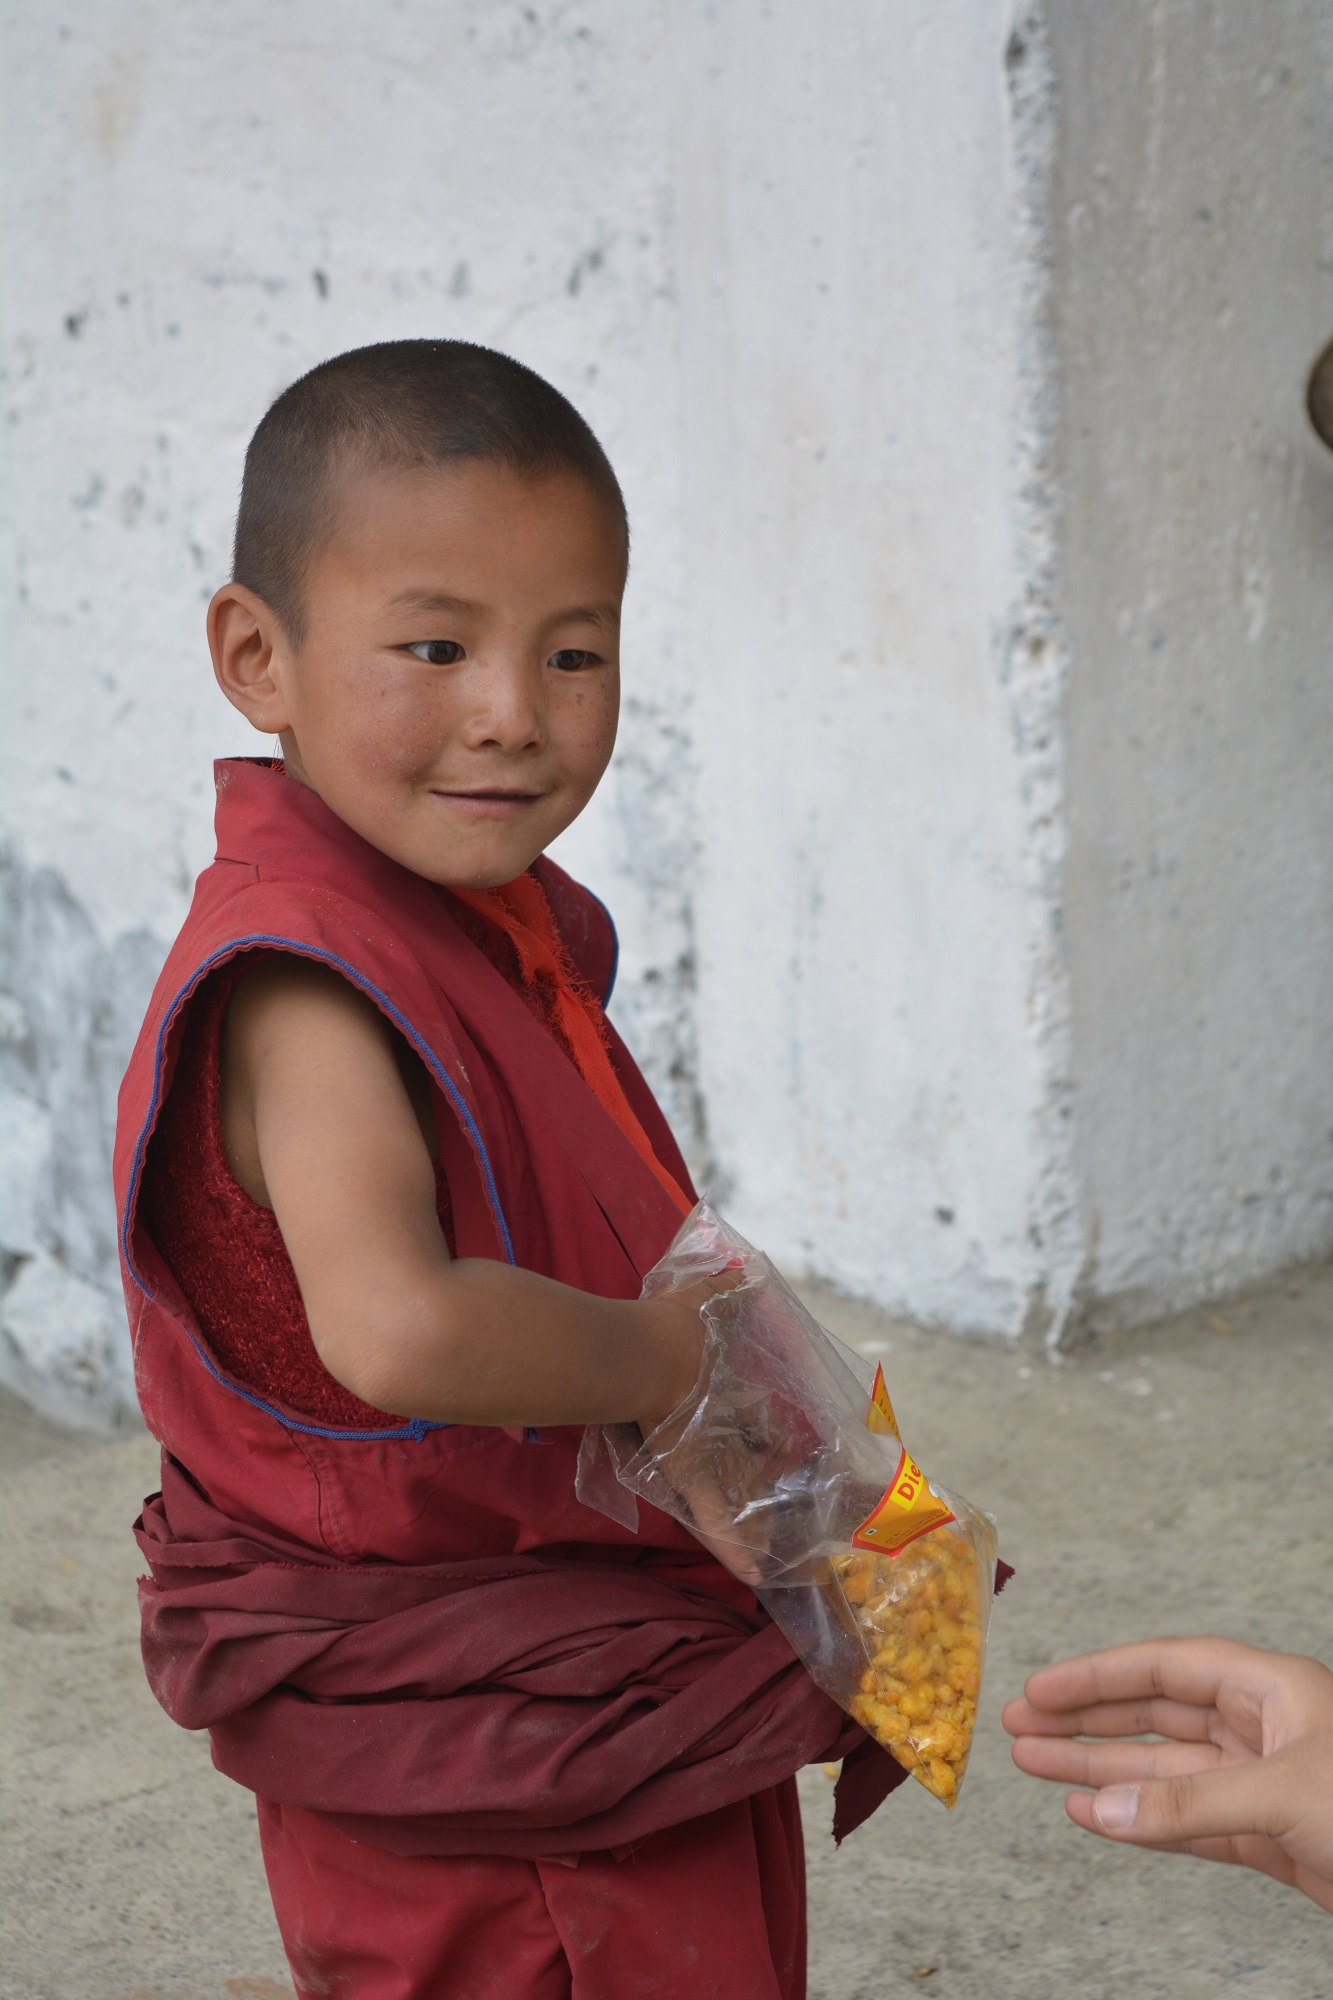 A packet of Diet Namkeen (Salty Snack) brought a smile on this little monk's face